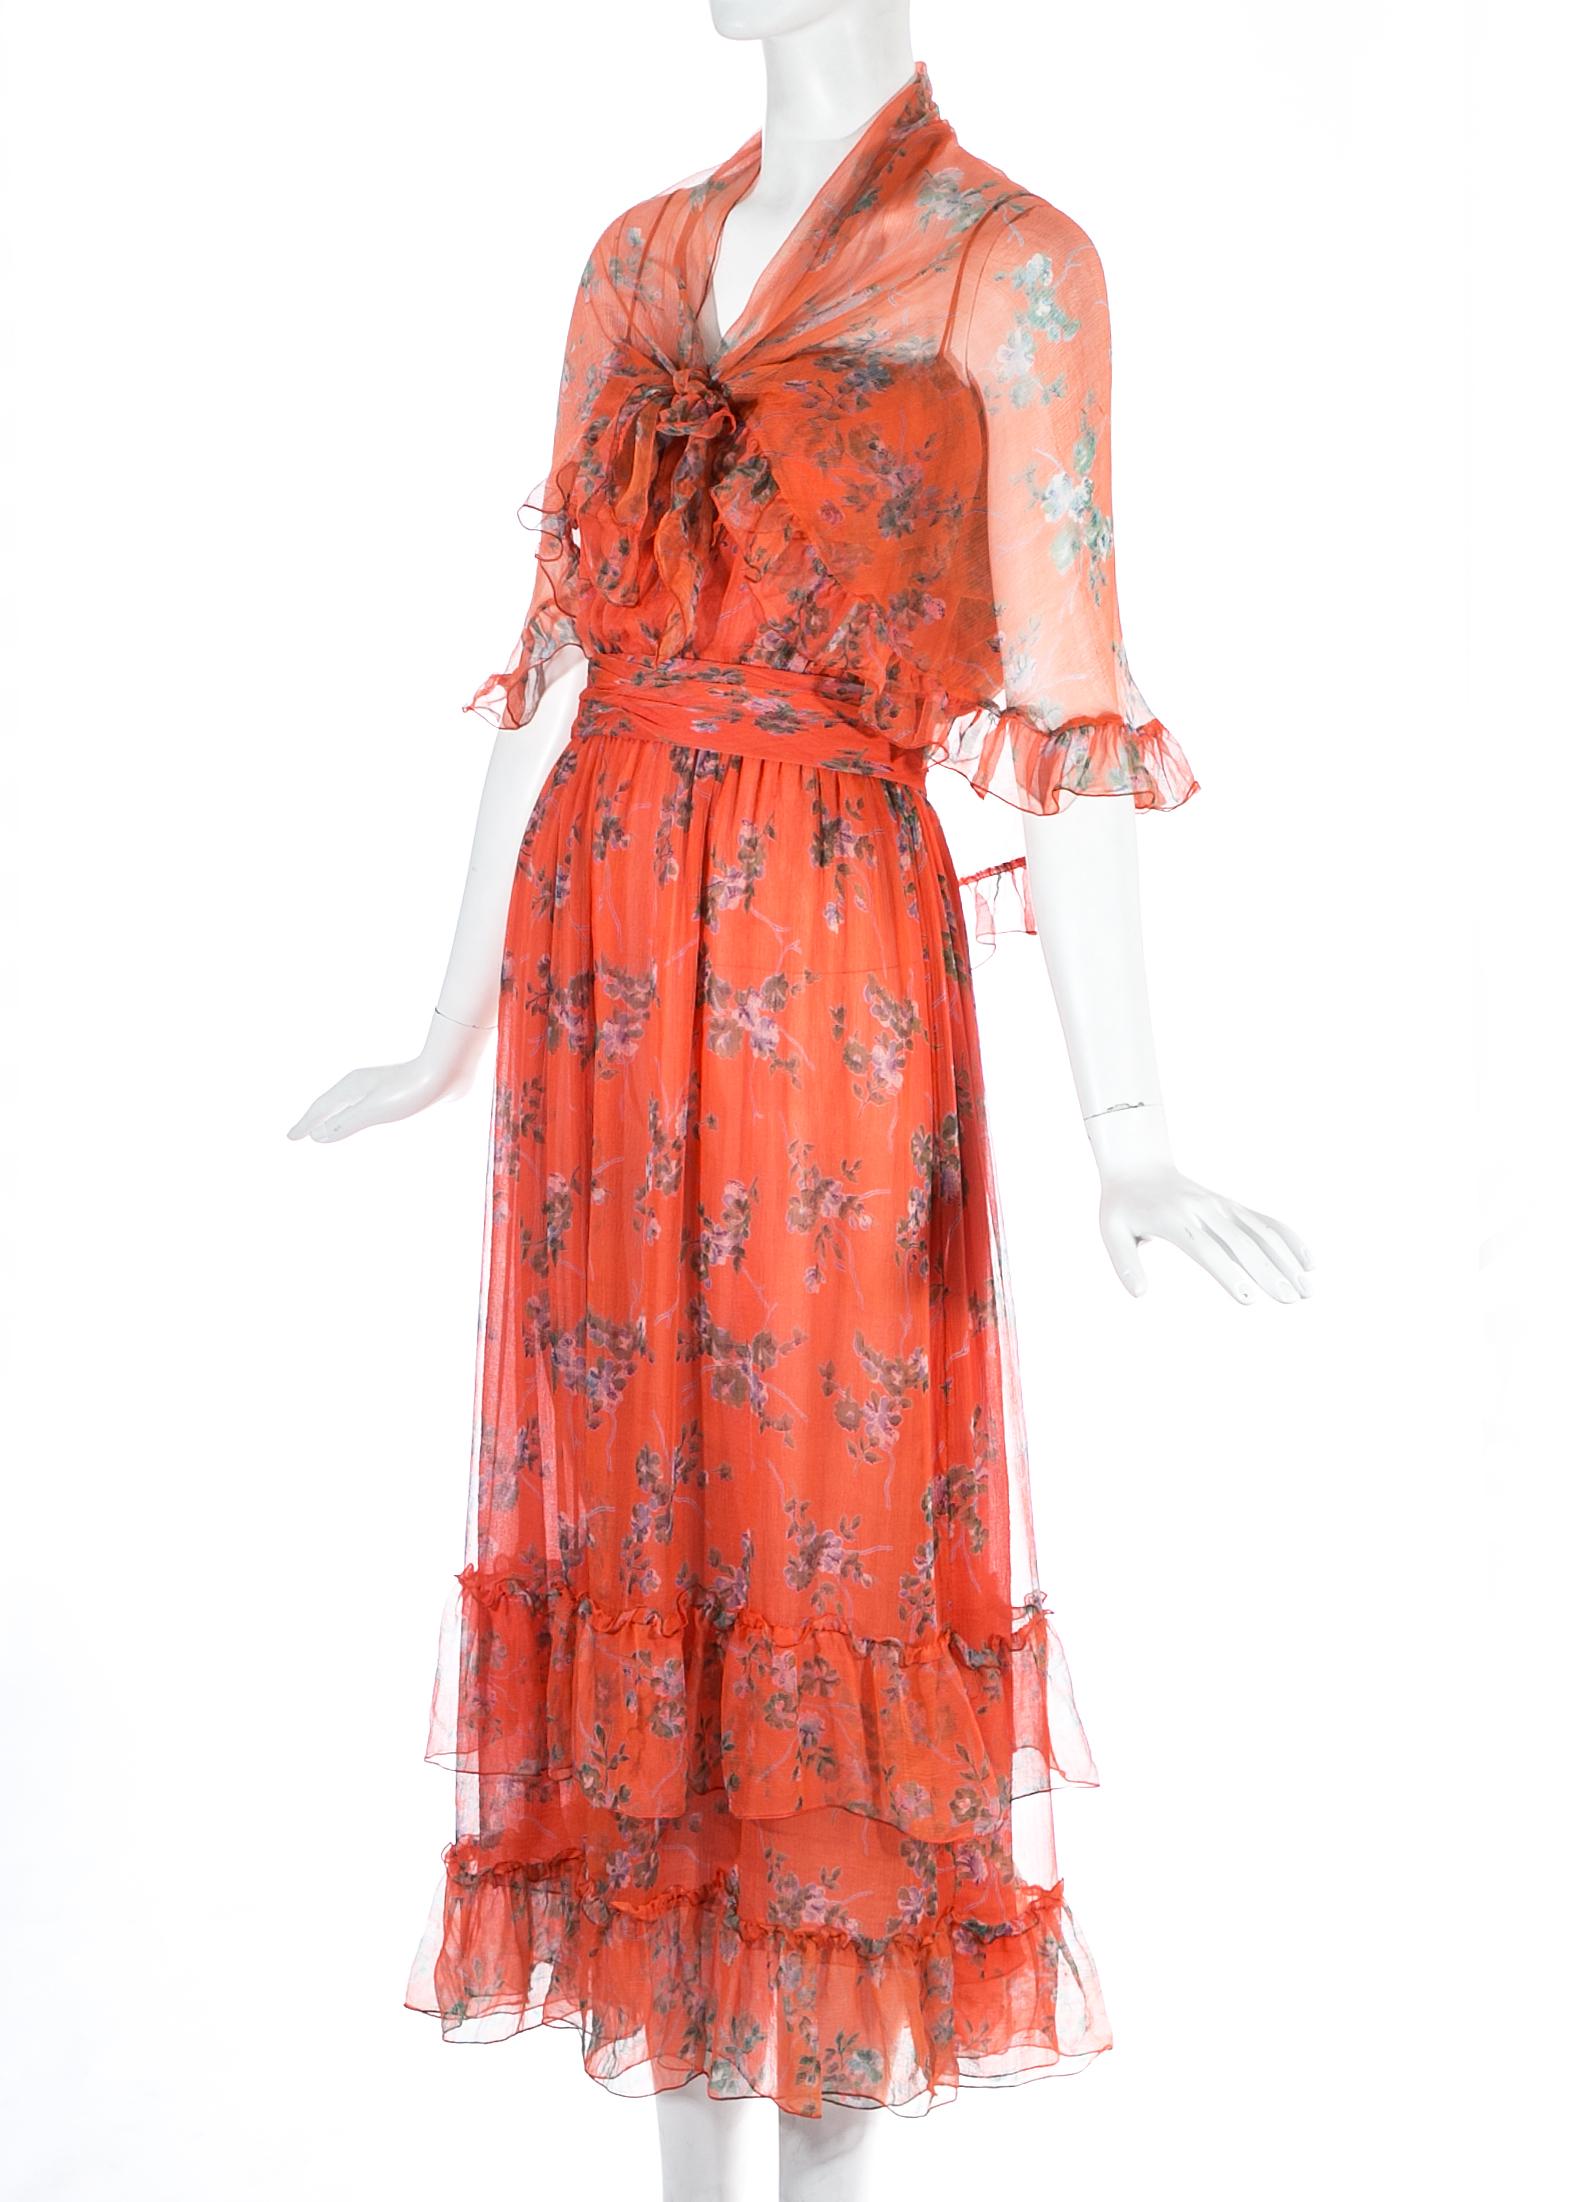 1970s orange silk chiffon floral summer dress with matching scarf with ruffled trim. 

1970s